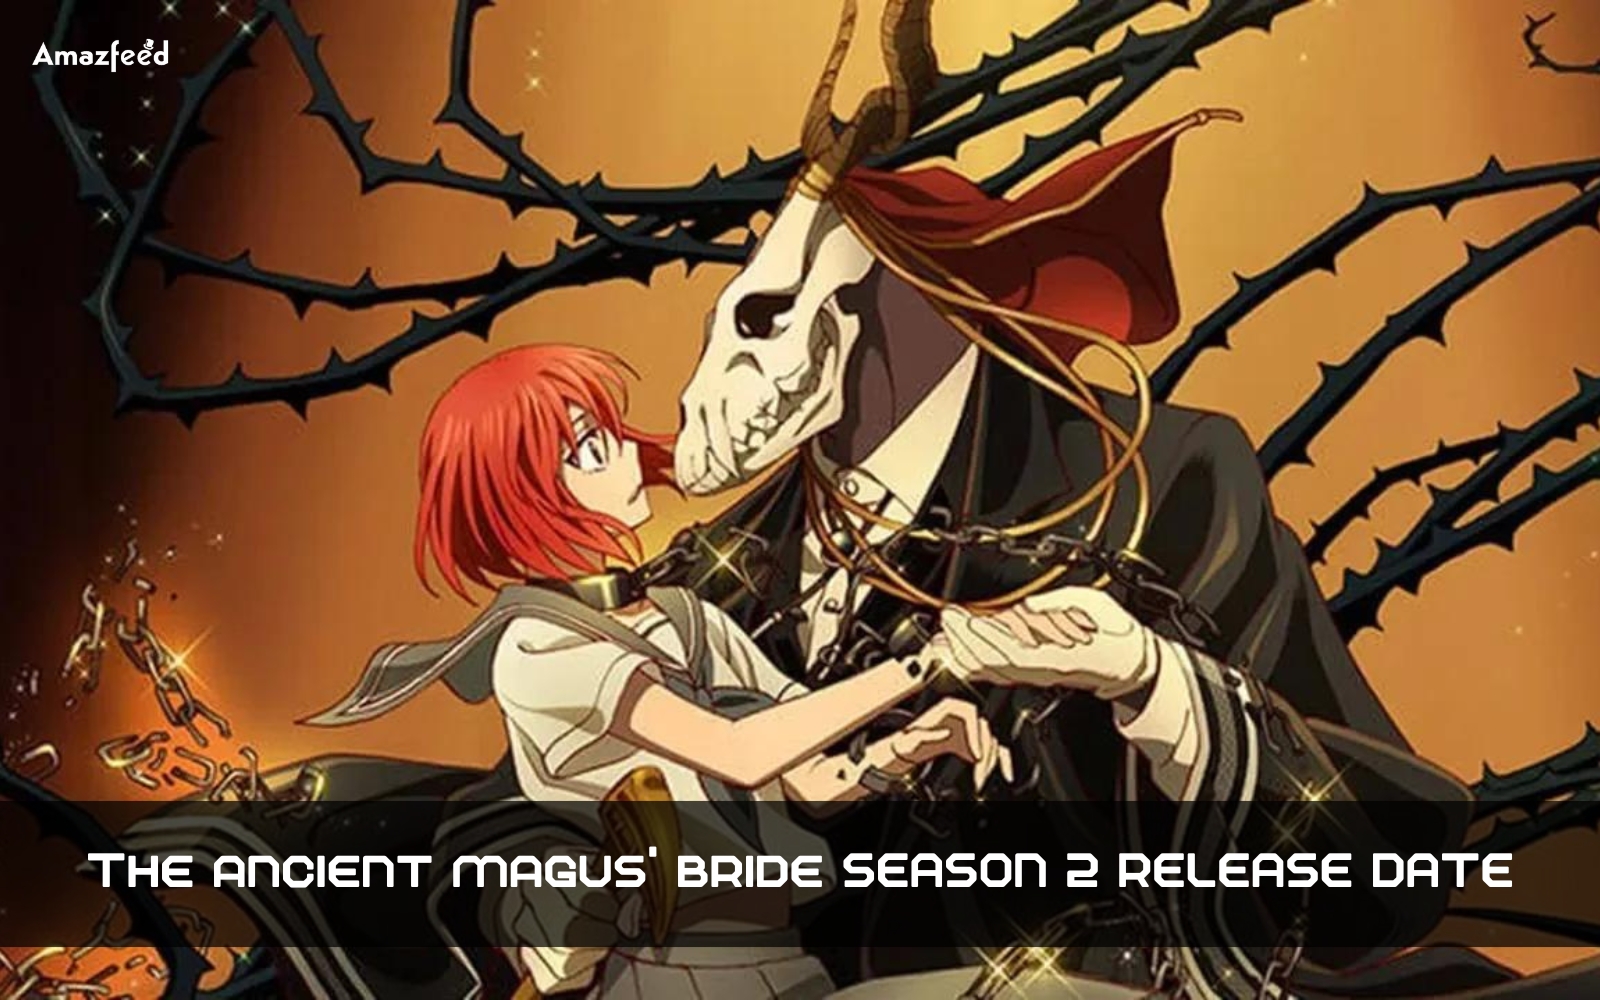 Will The Ancient Magus' Bride Season 2 ever happen, or will it be canceled by the studio